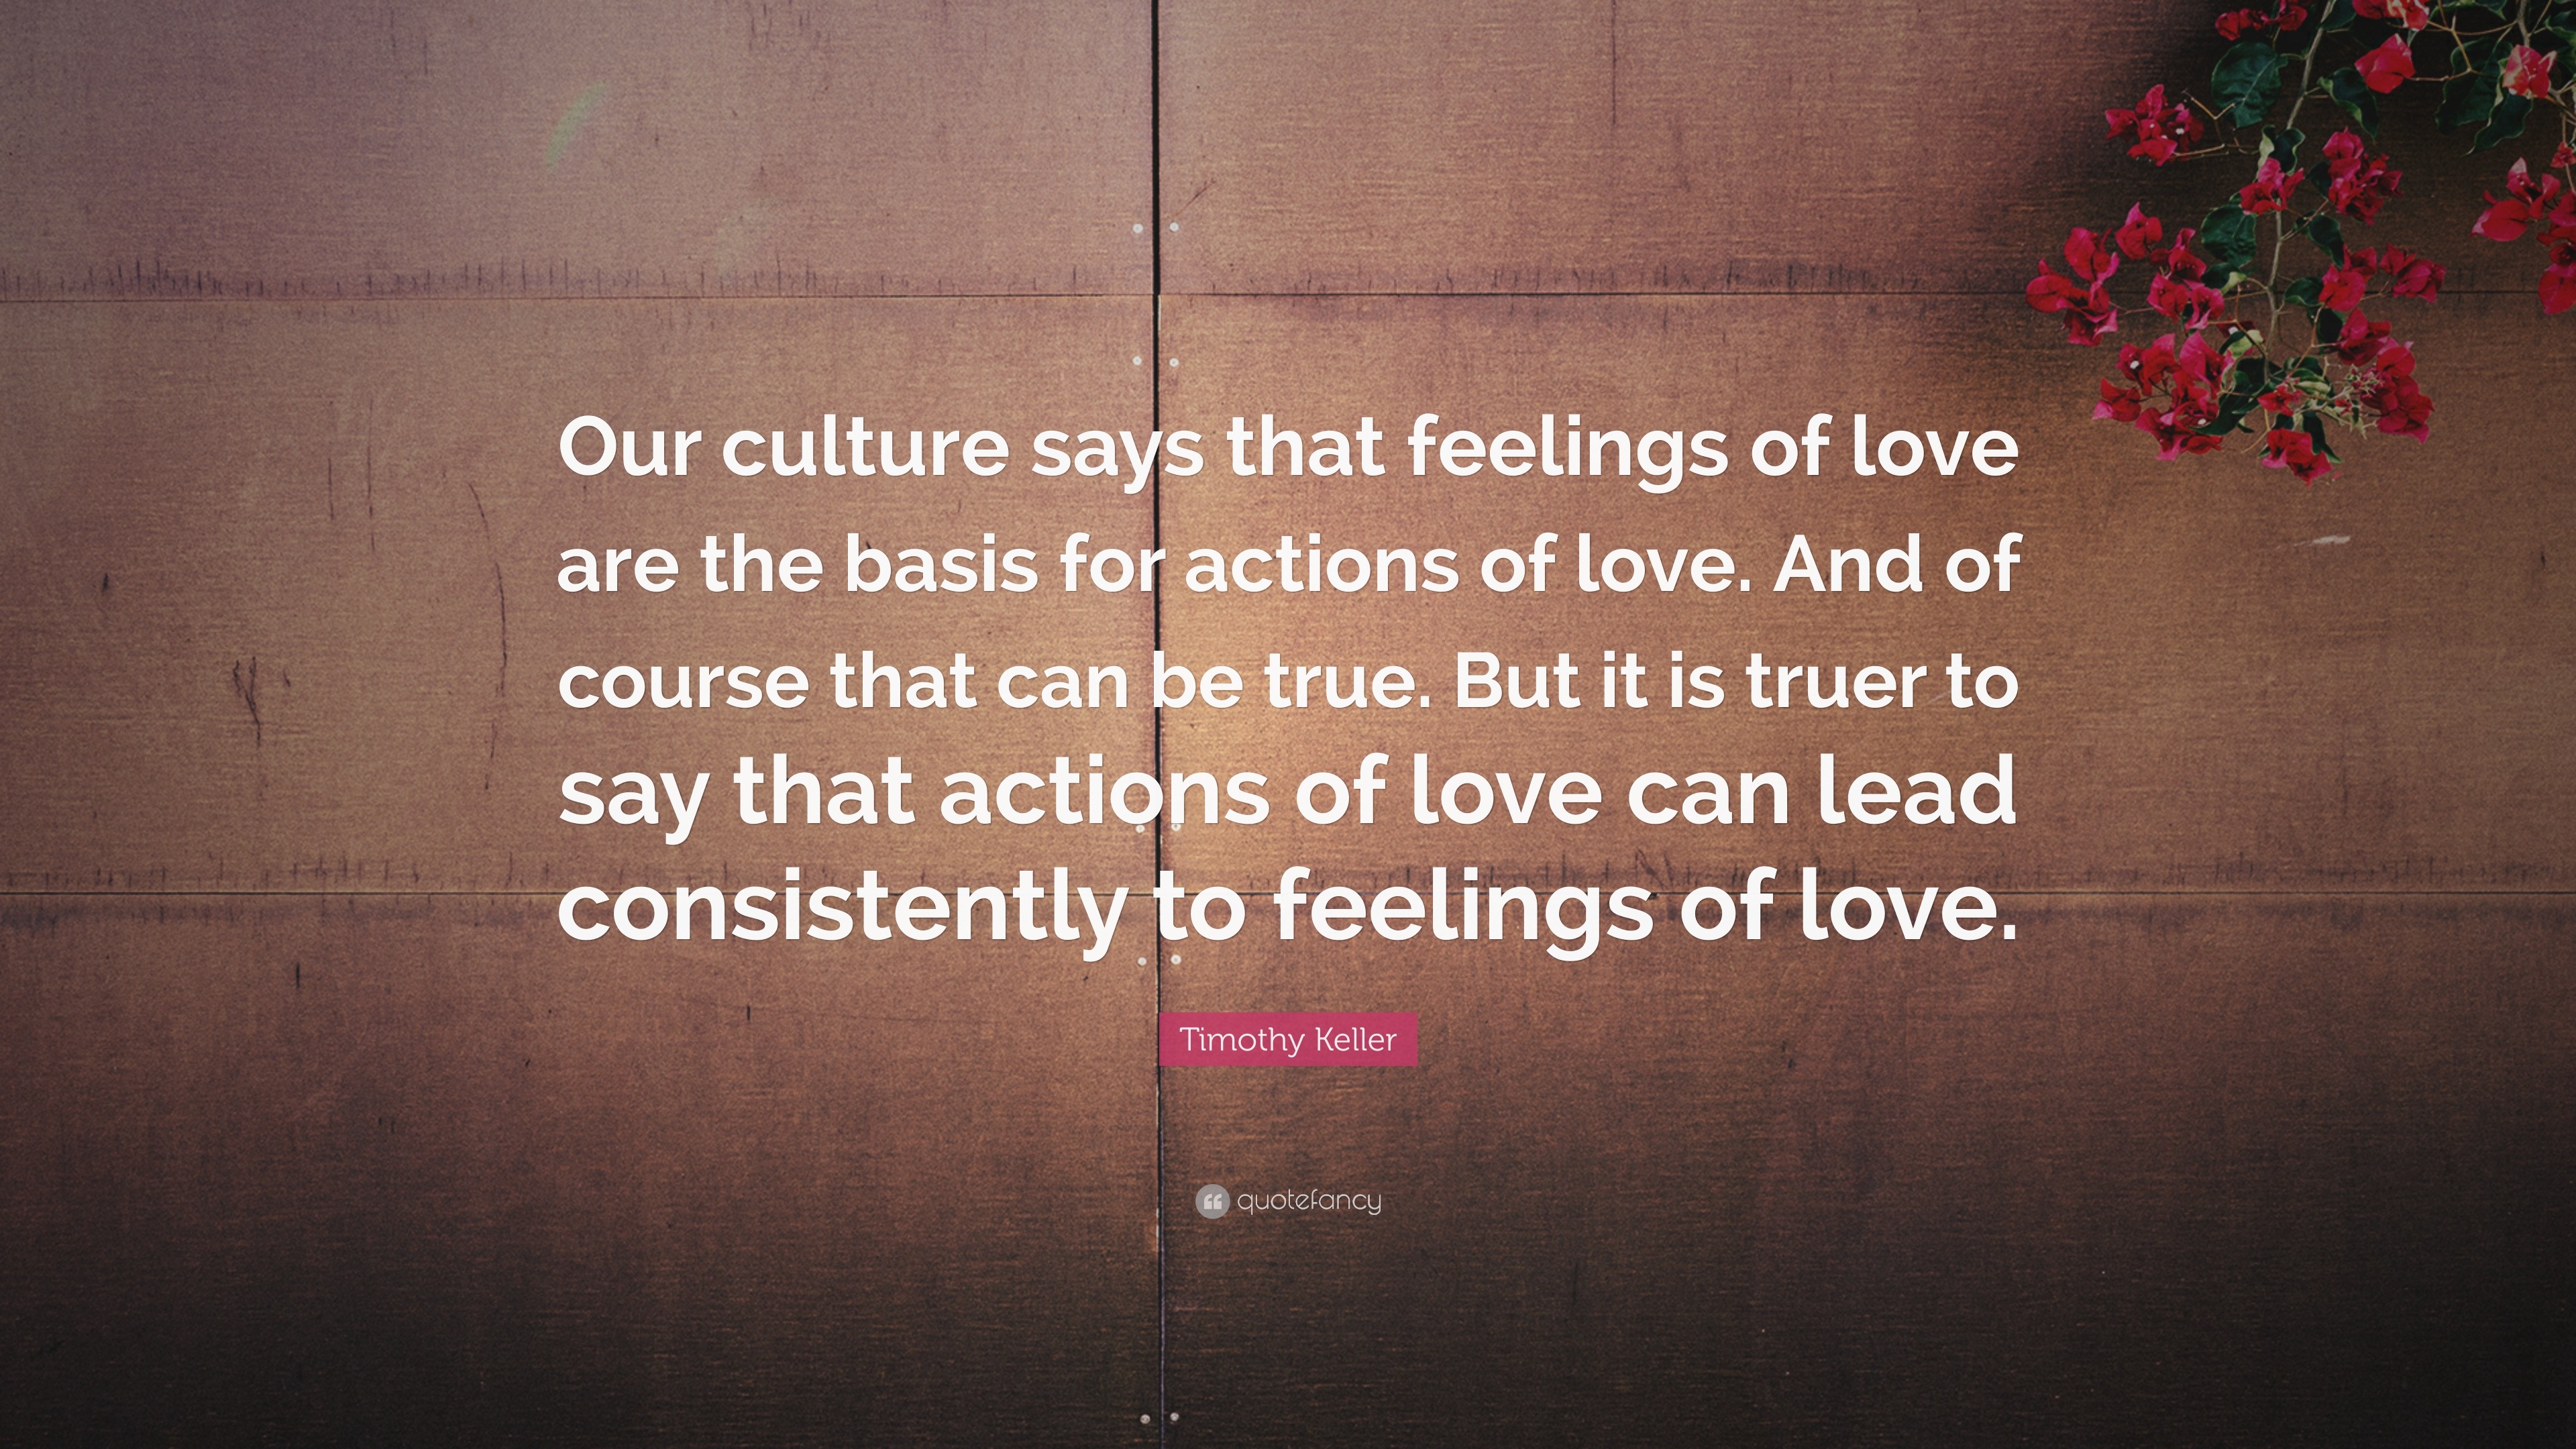 Timothy Keller Quote “Our culture says that feelings of love are the basis for